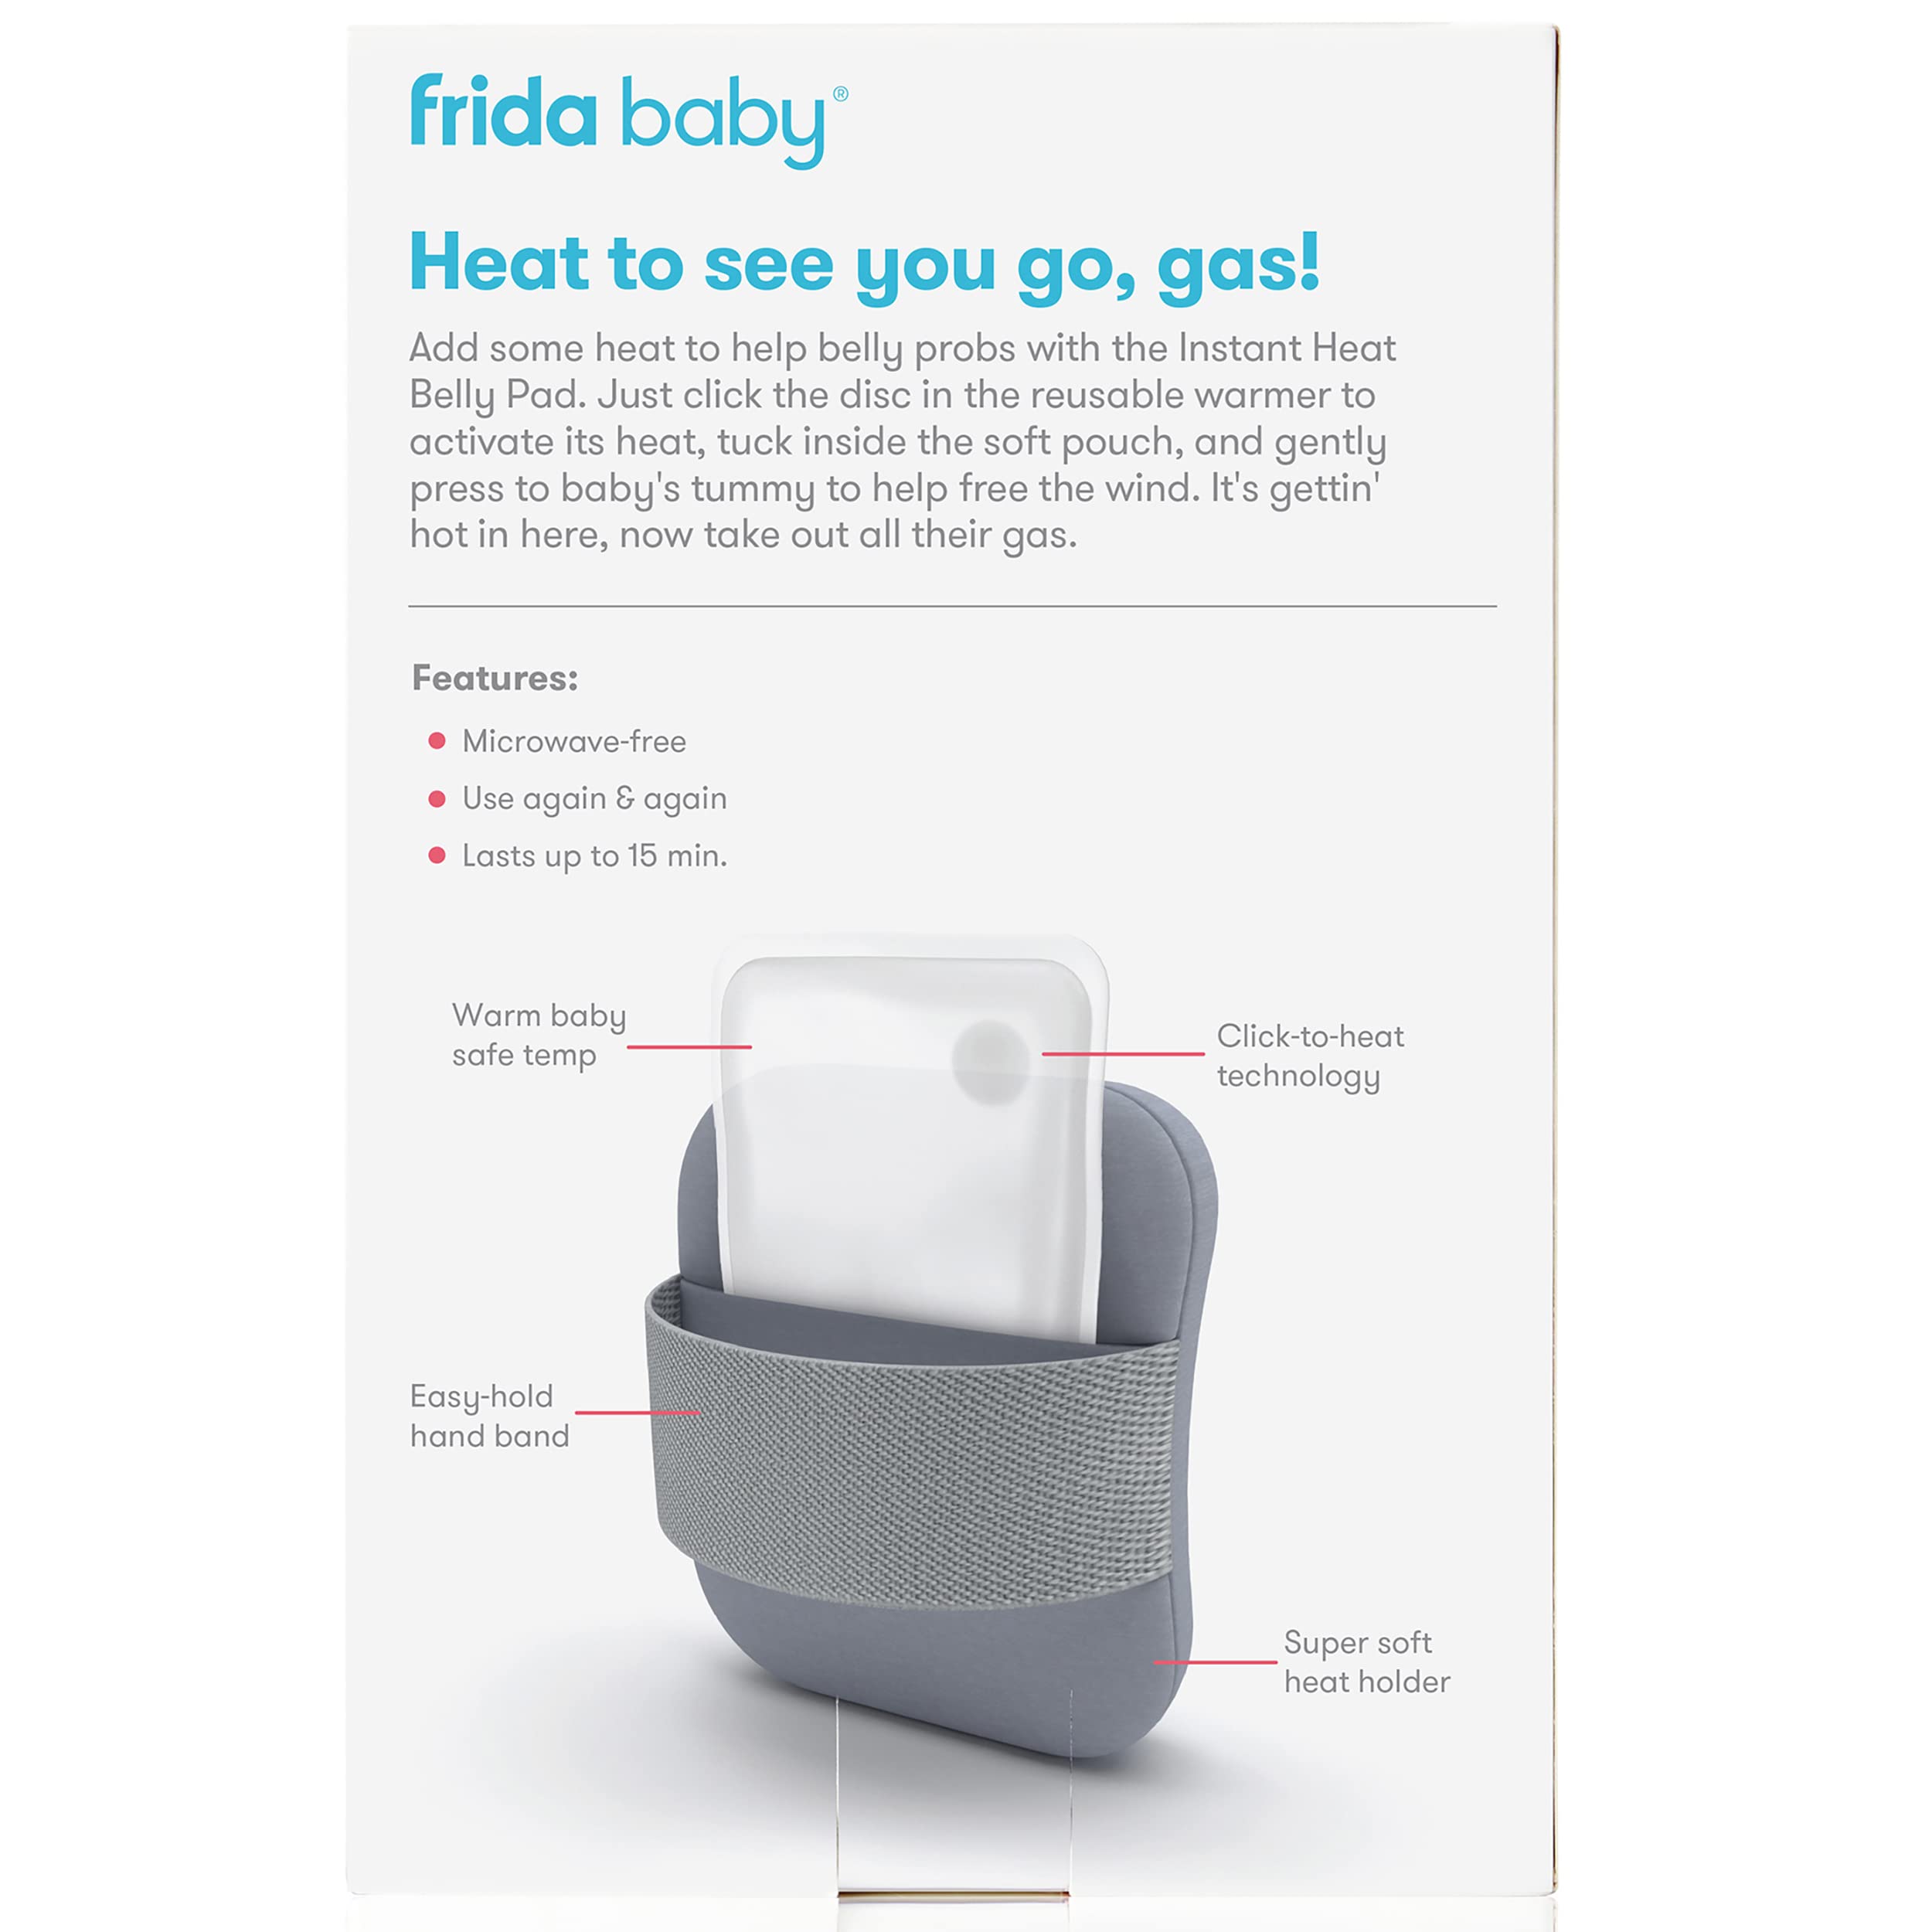 Frida Baby Gas + Colic Heating Pad for Natural Belly Relief | Gentle Heat to Relax + Soothe Bellies | Instant Tummy Warmer | Soothe Colic Discomfort